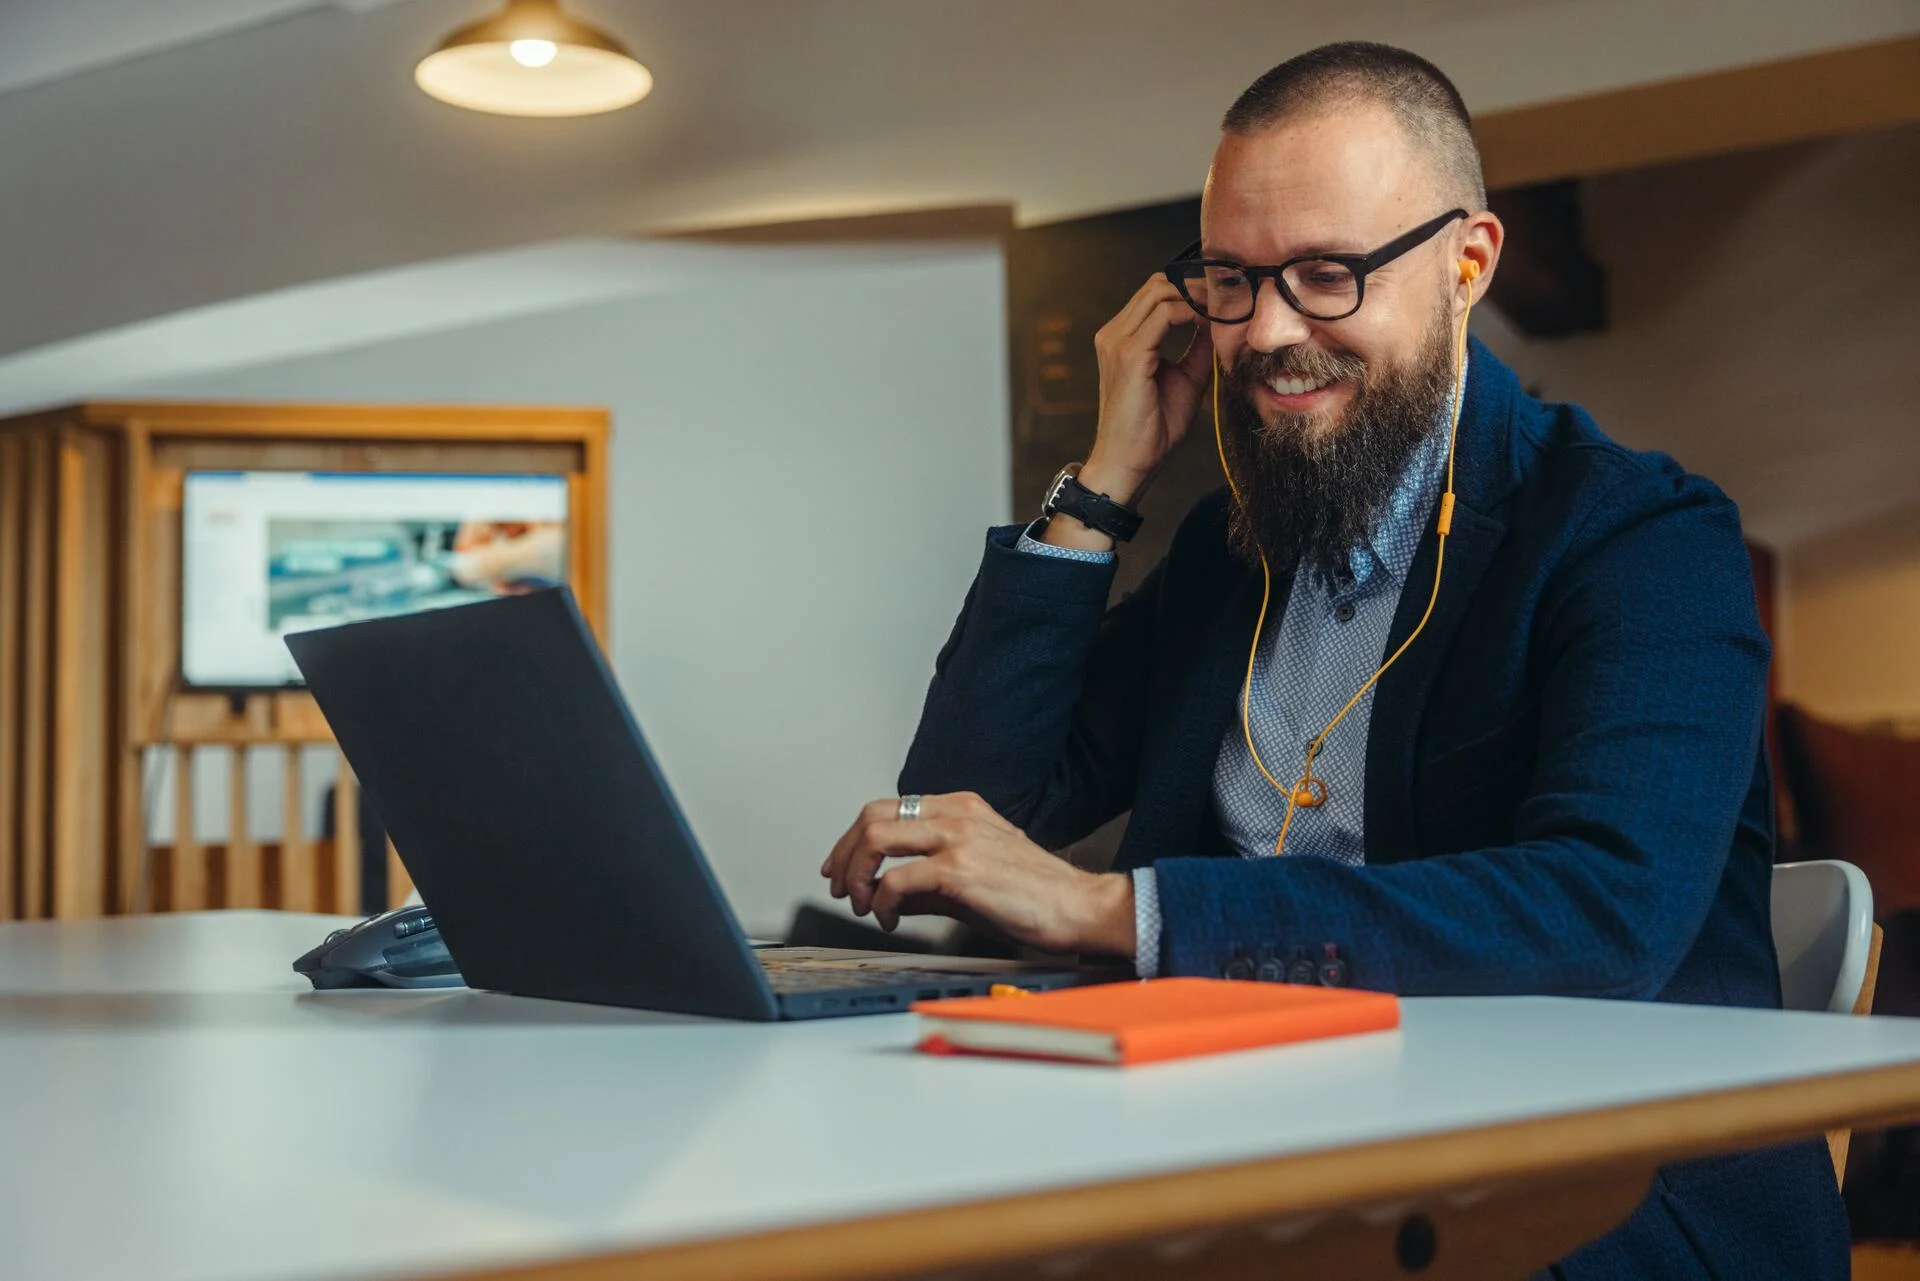 A man with a beard and glasses is taking part in a call in an office in front of his laptop.